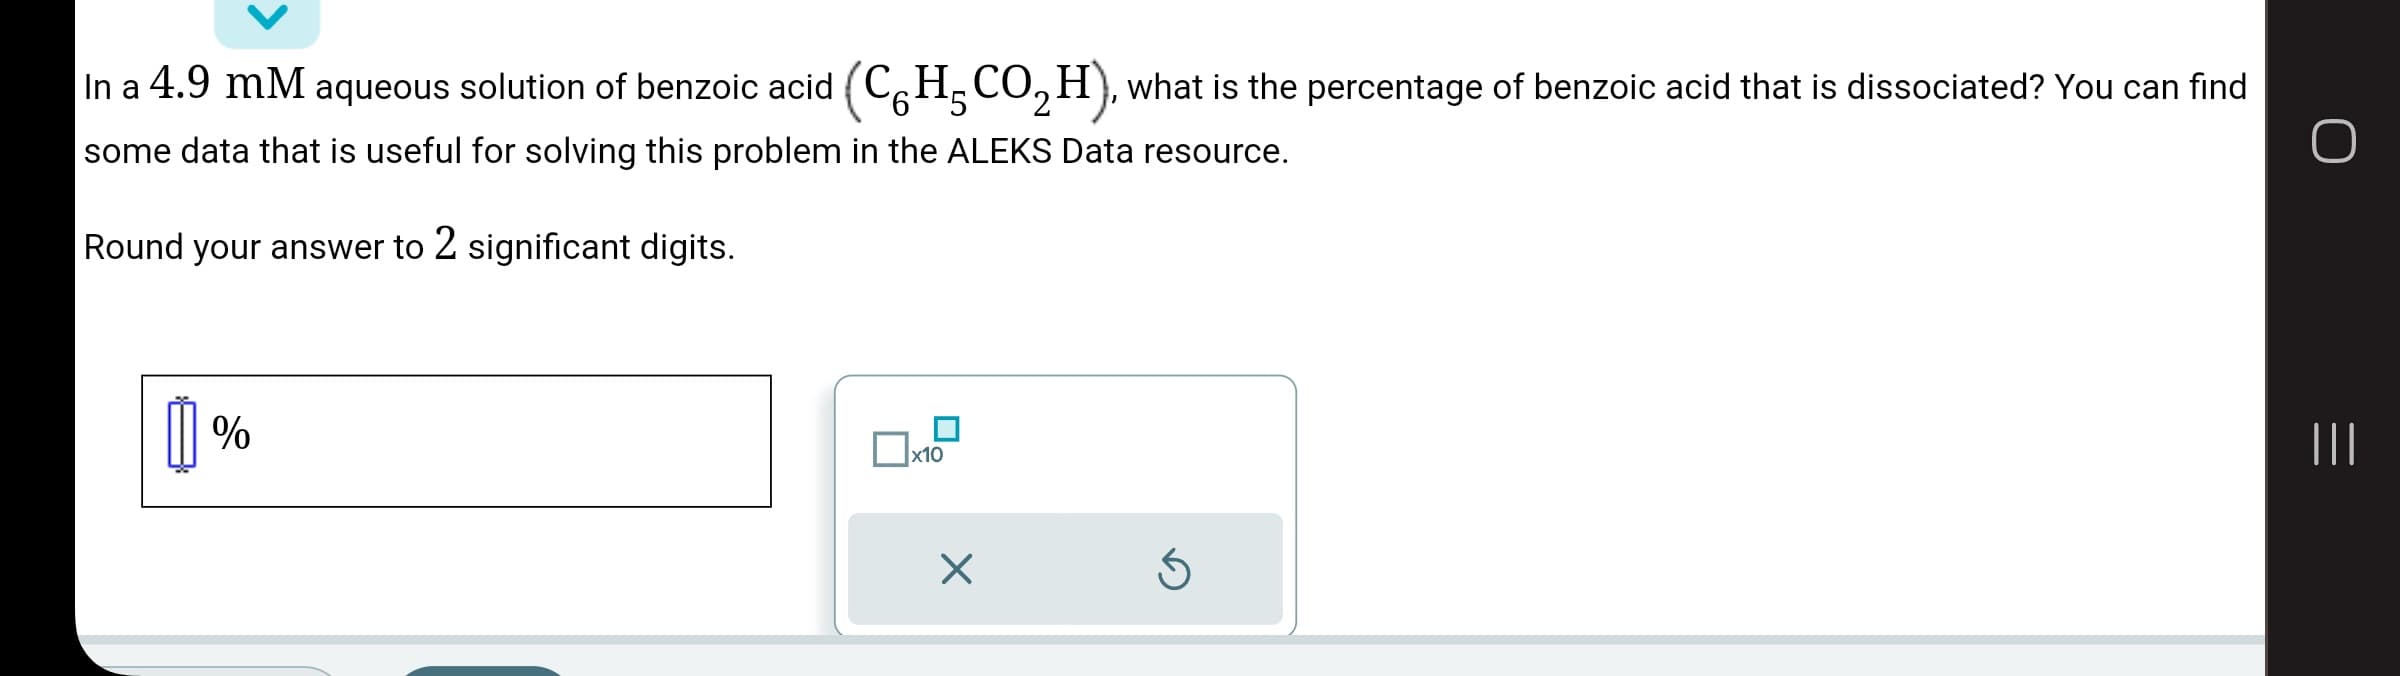 In a 4.9 mm aqueous solution of benzoic acid (C6H₂CO₂H), what is the percentage of benzoic acid that is dissociated? You can find
some data that is useful for solving this problem in the ALEKS Data resource.
O
Round your answer to 2 significant digits.
[]%
x10
X
Ś
|||